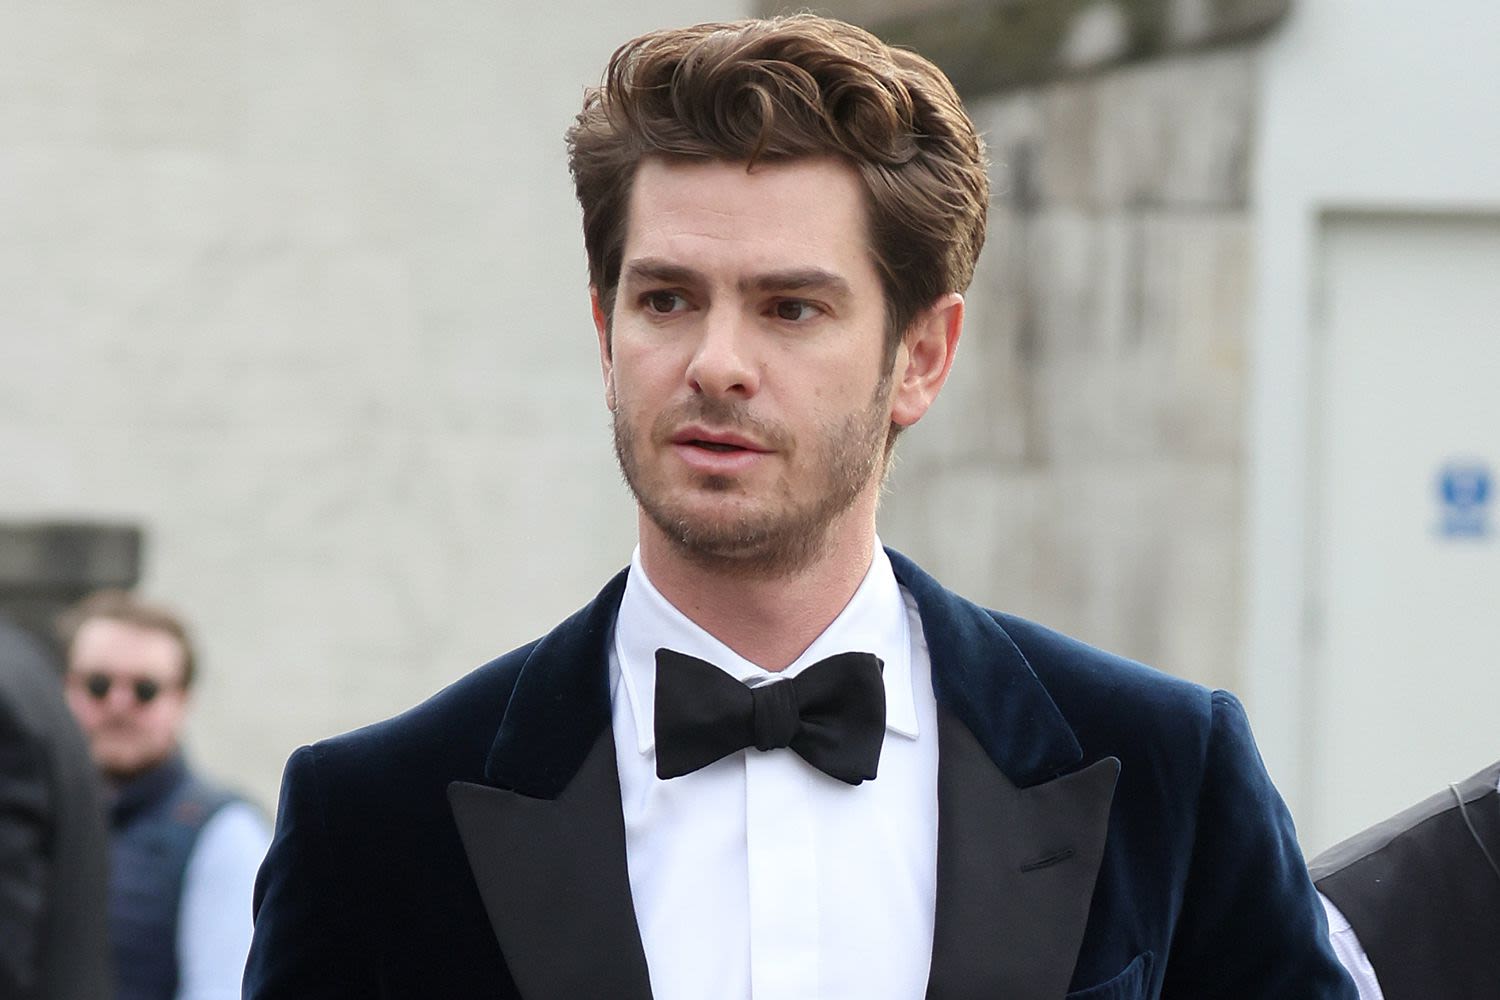 Andrew Garfield Is Ultra-Handsome While in London, Plus Sydney Sweeney, Selena Gomez, Rosamund Pike and More